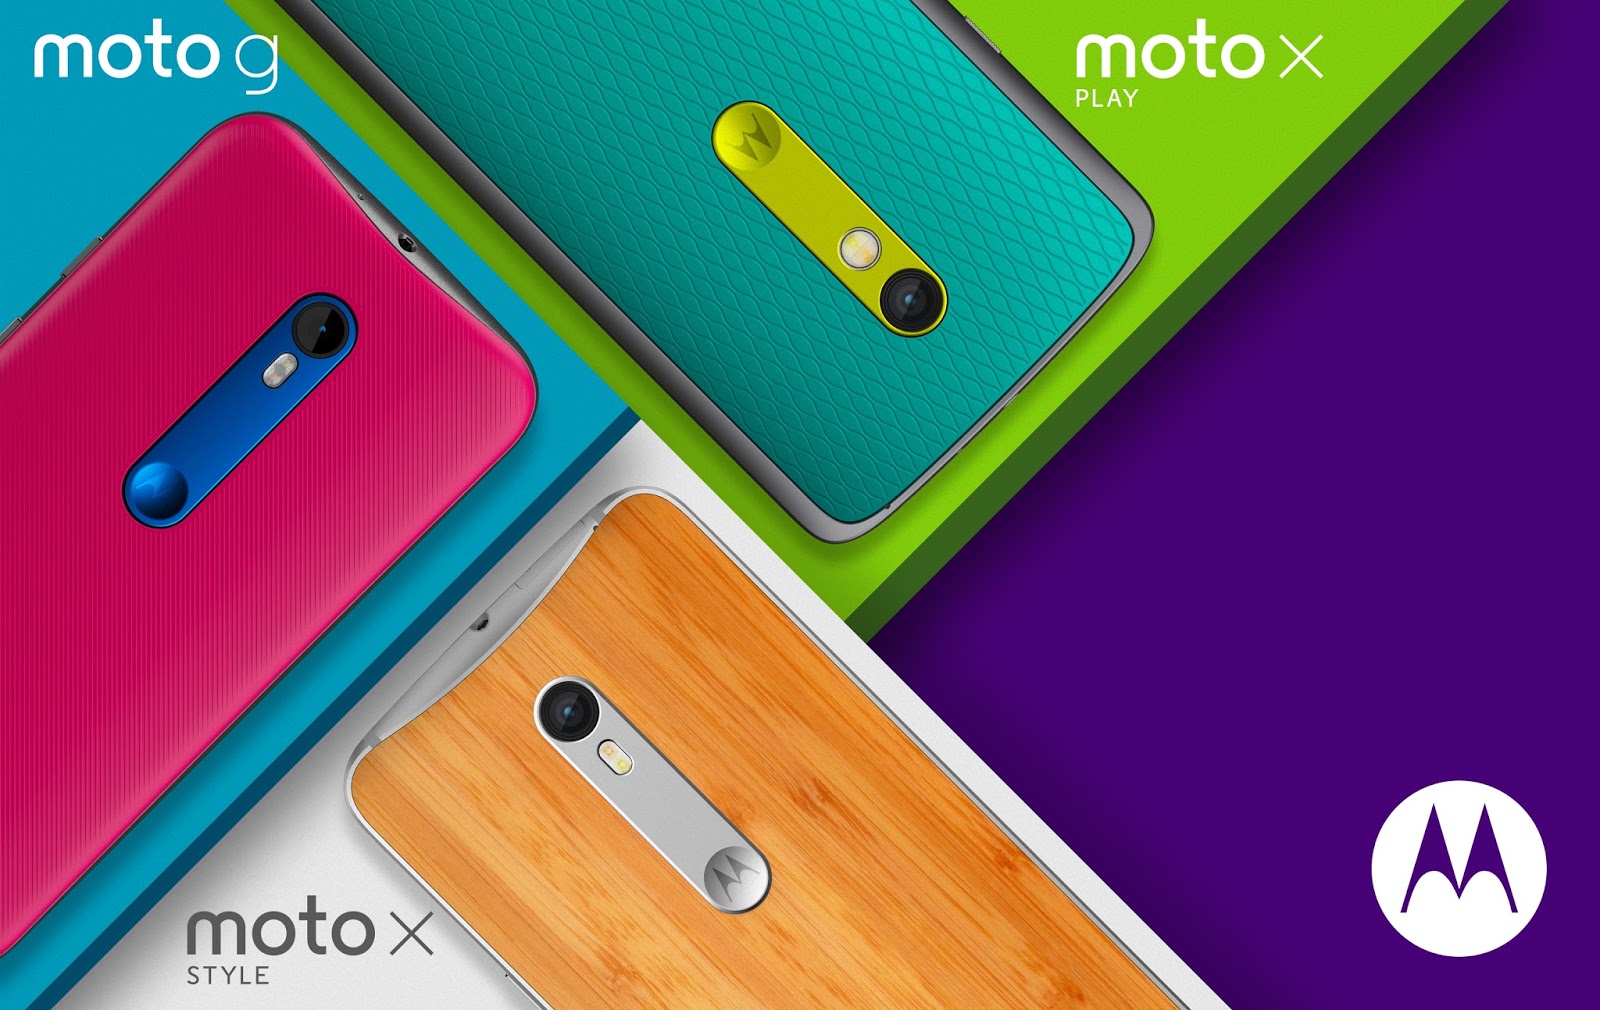 Find Your Perfect Moto Match with the All-New Moto G, Moto X Play and Moto X Style